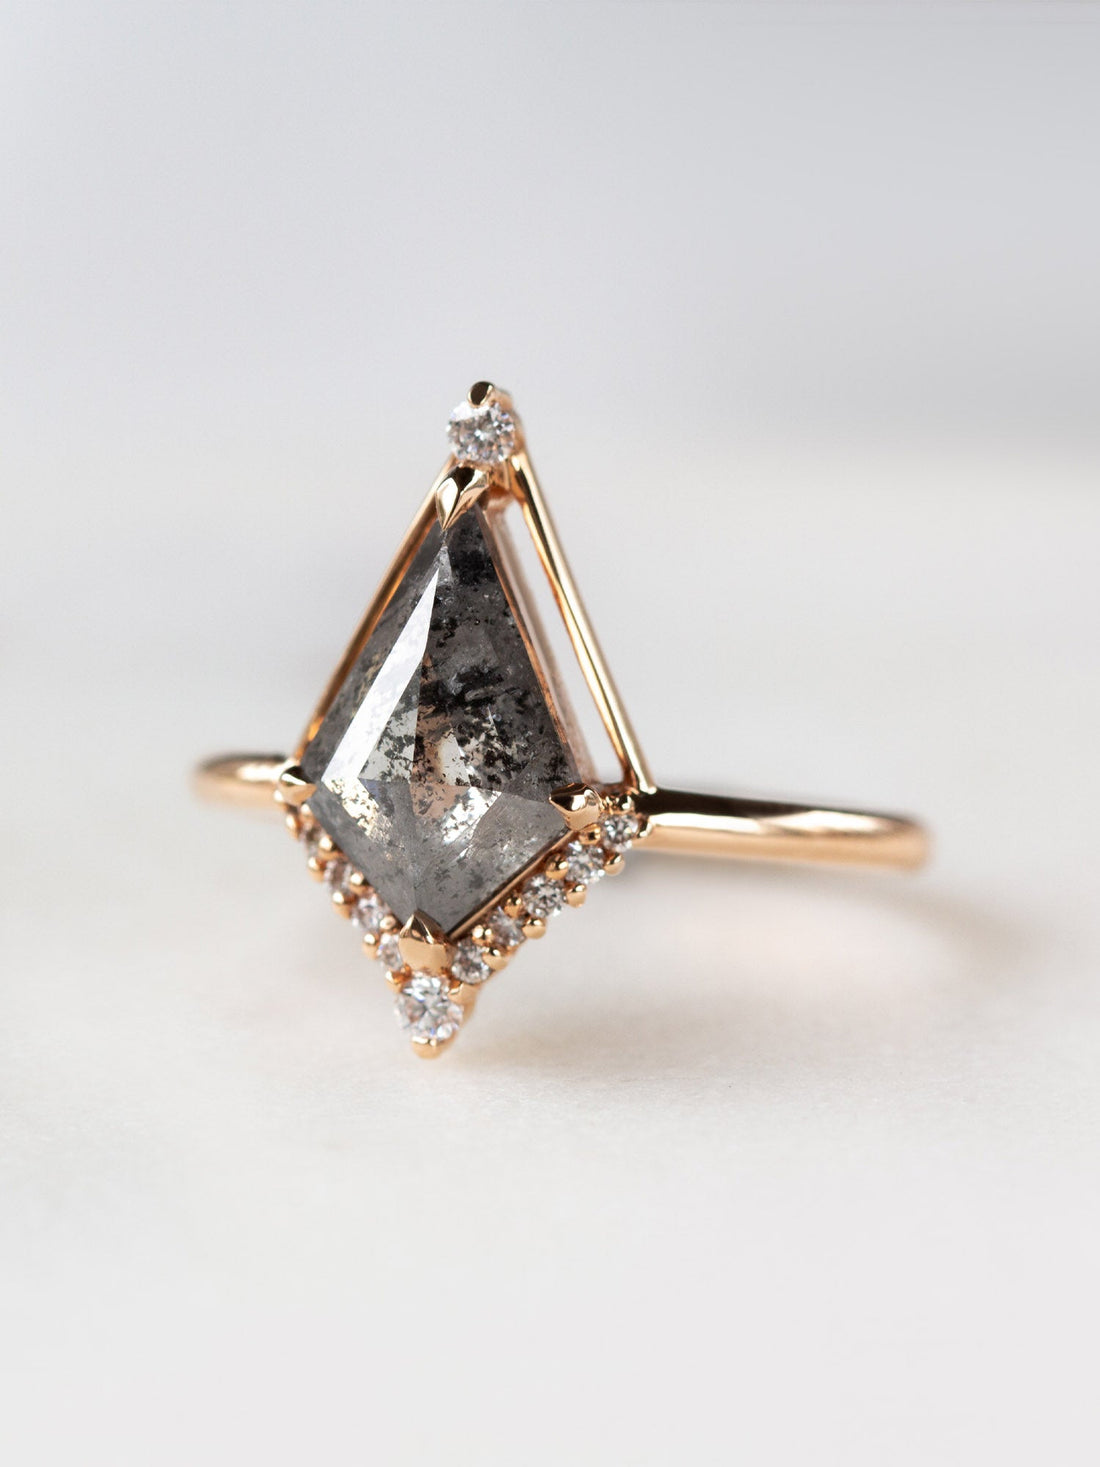 Kite shape salt and pepper diamond engagement ring with smaller round diamonds in 14k gold inspired by the art deco style and minimalism.